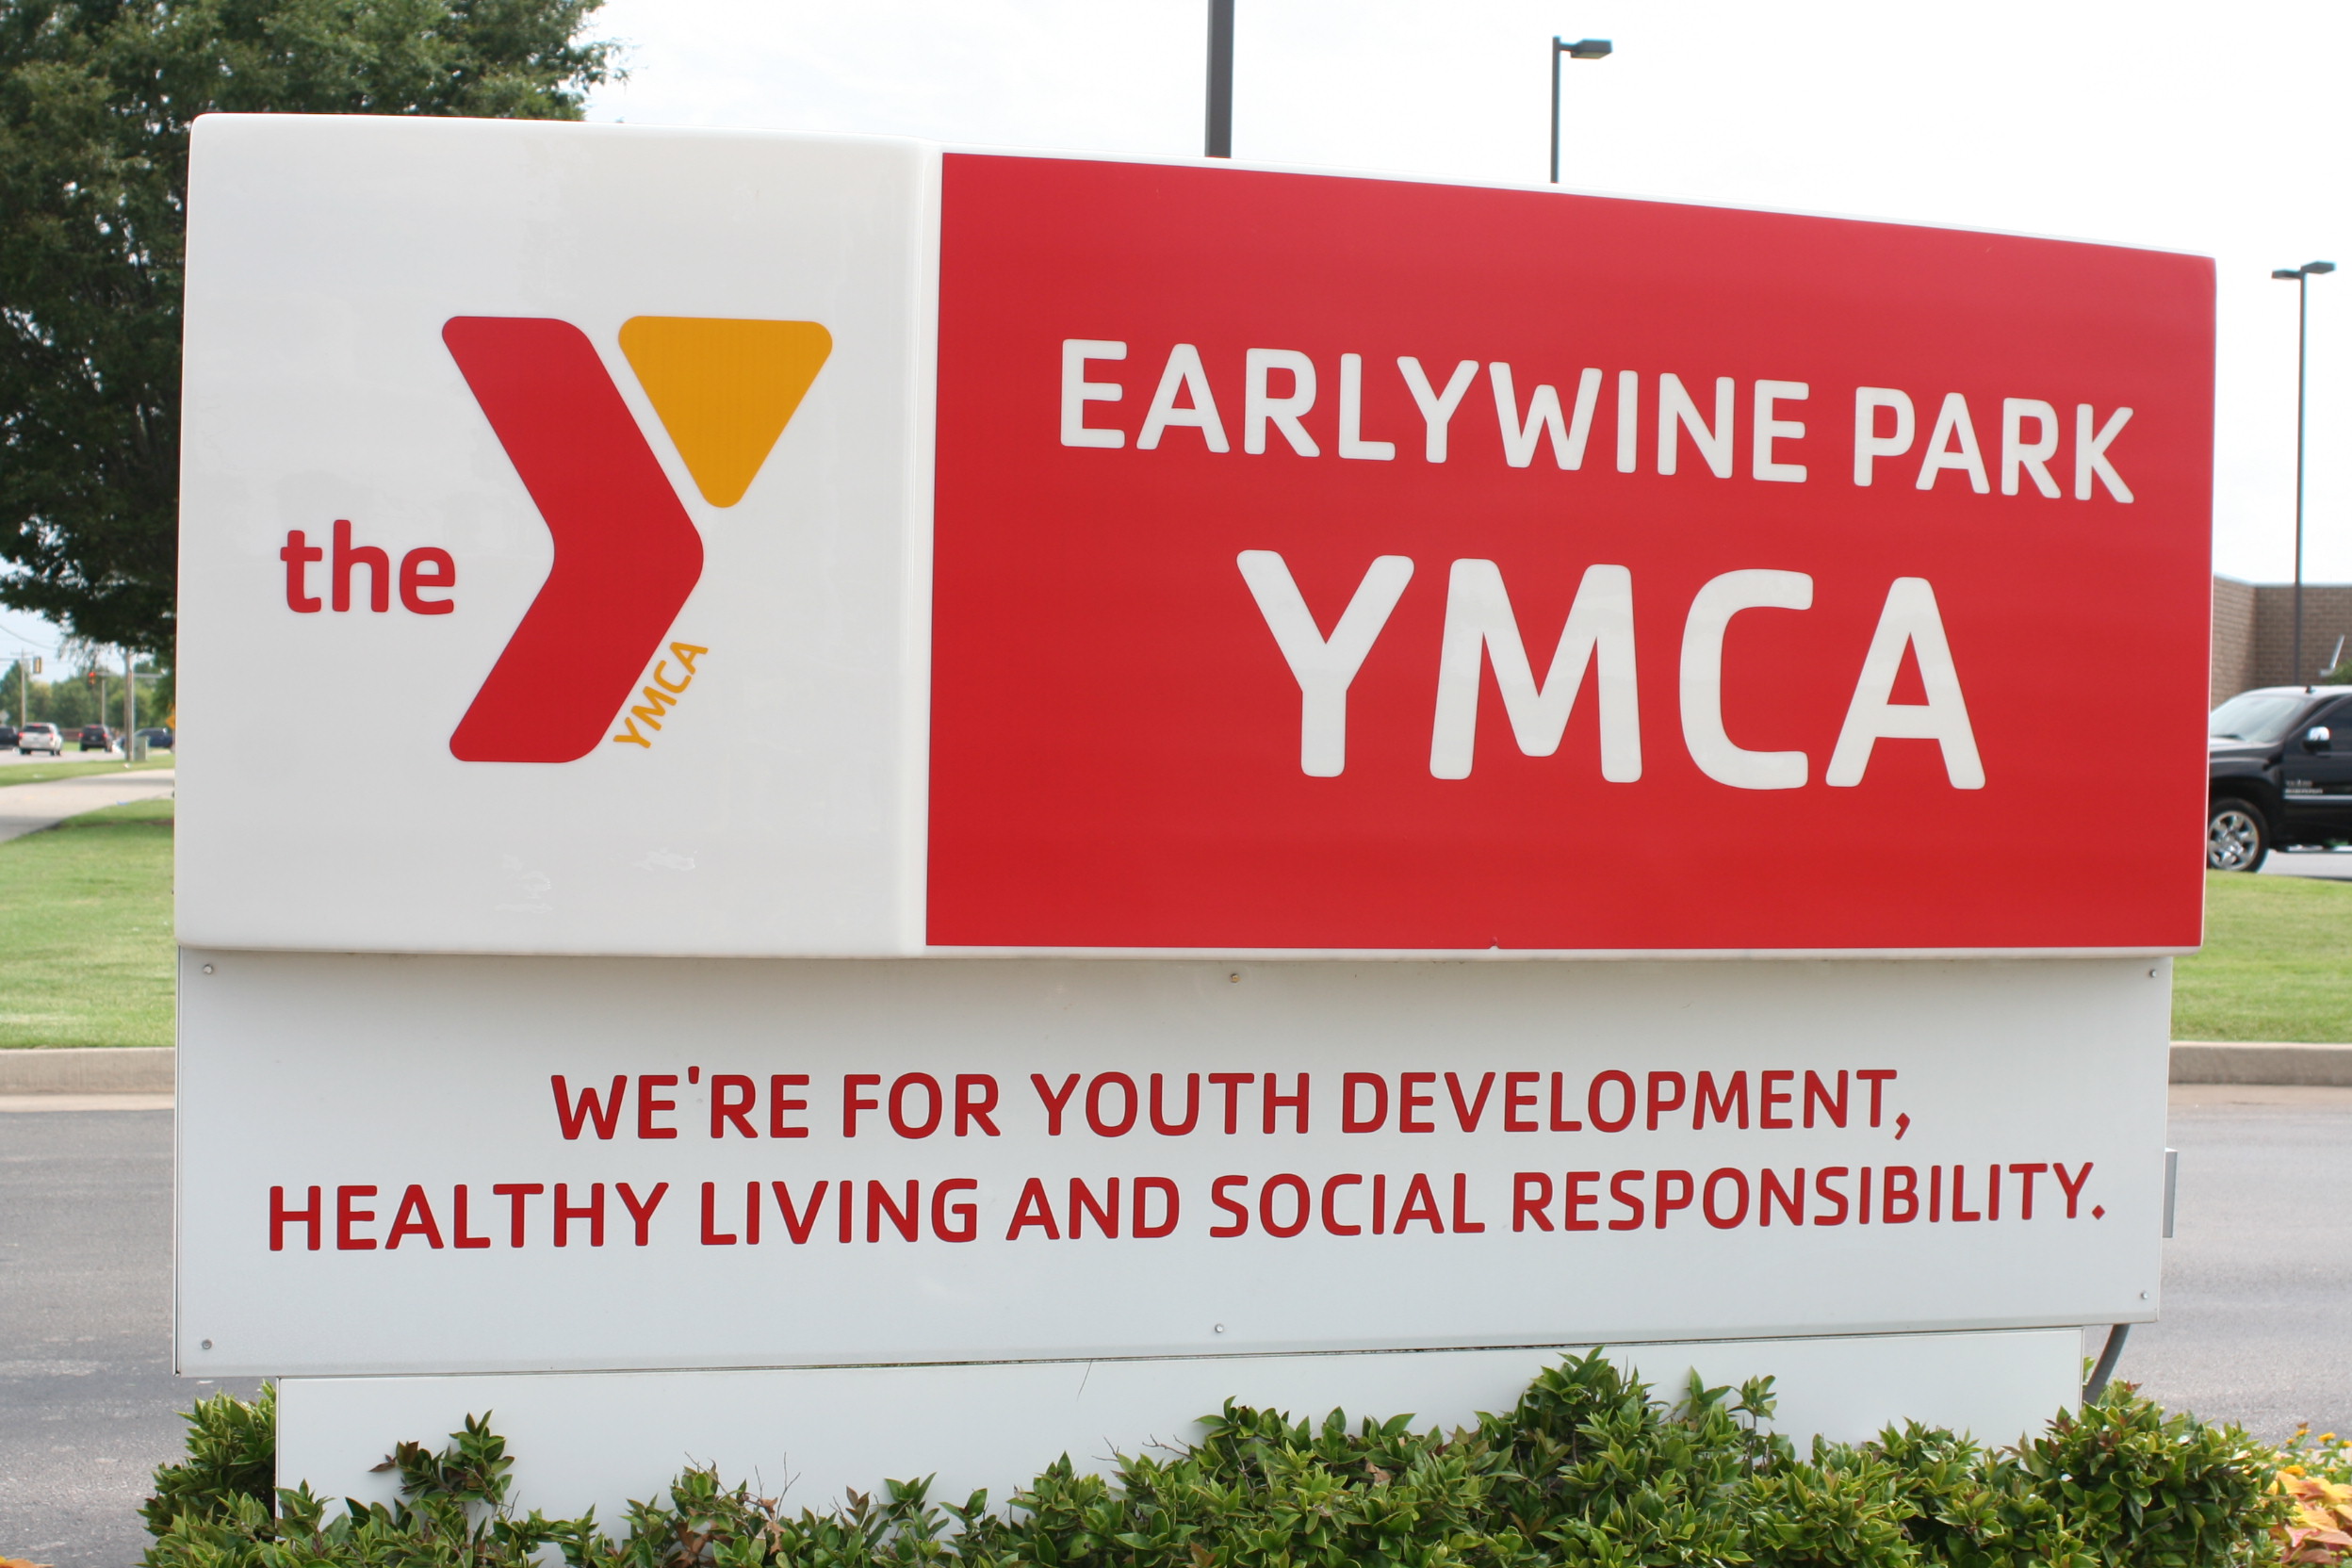 Students given free use of local YMCA